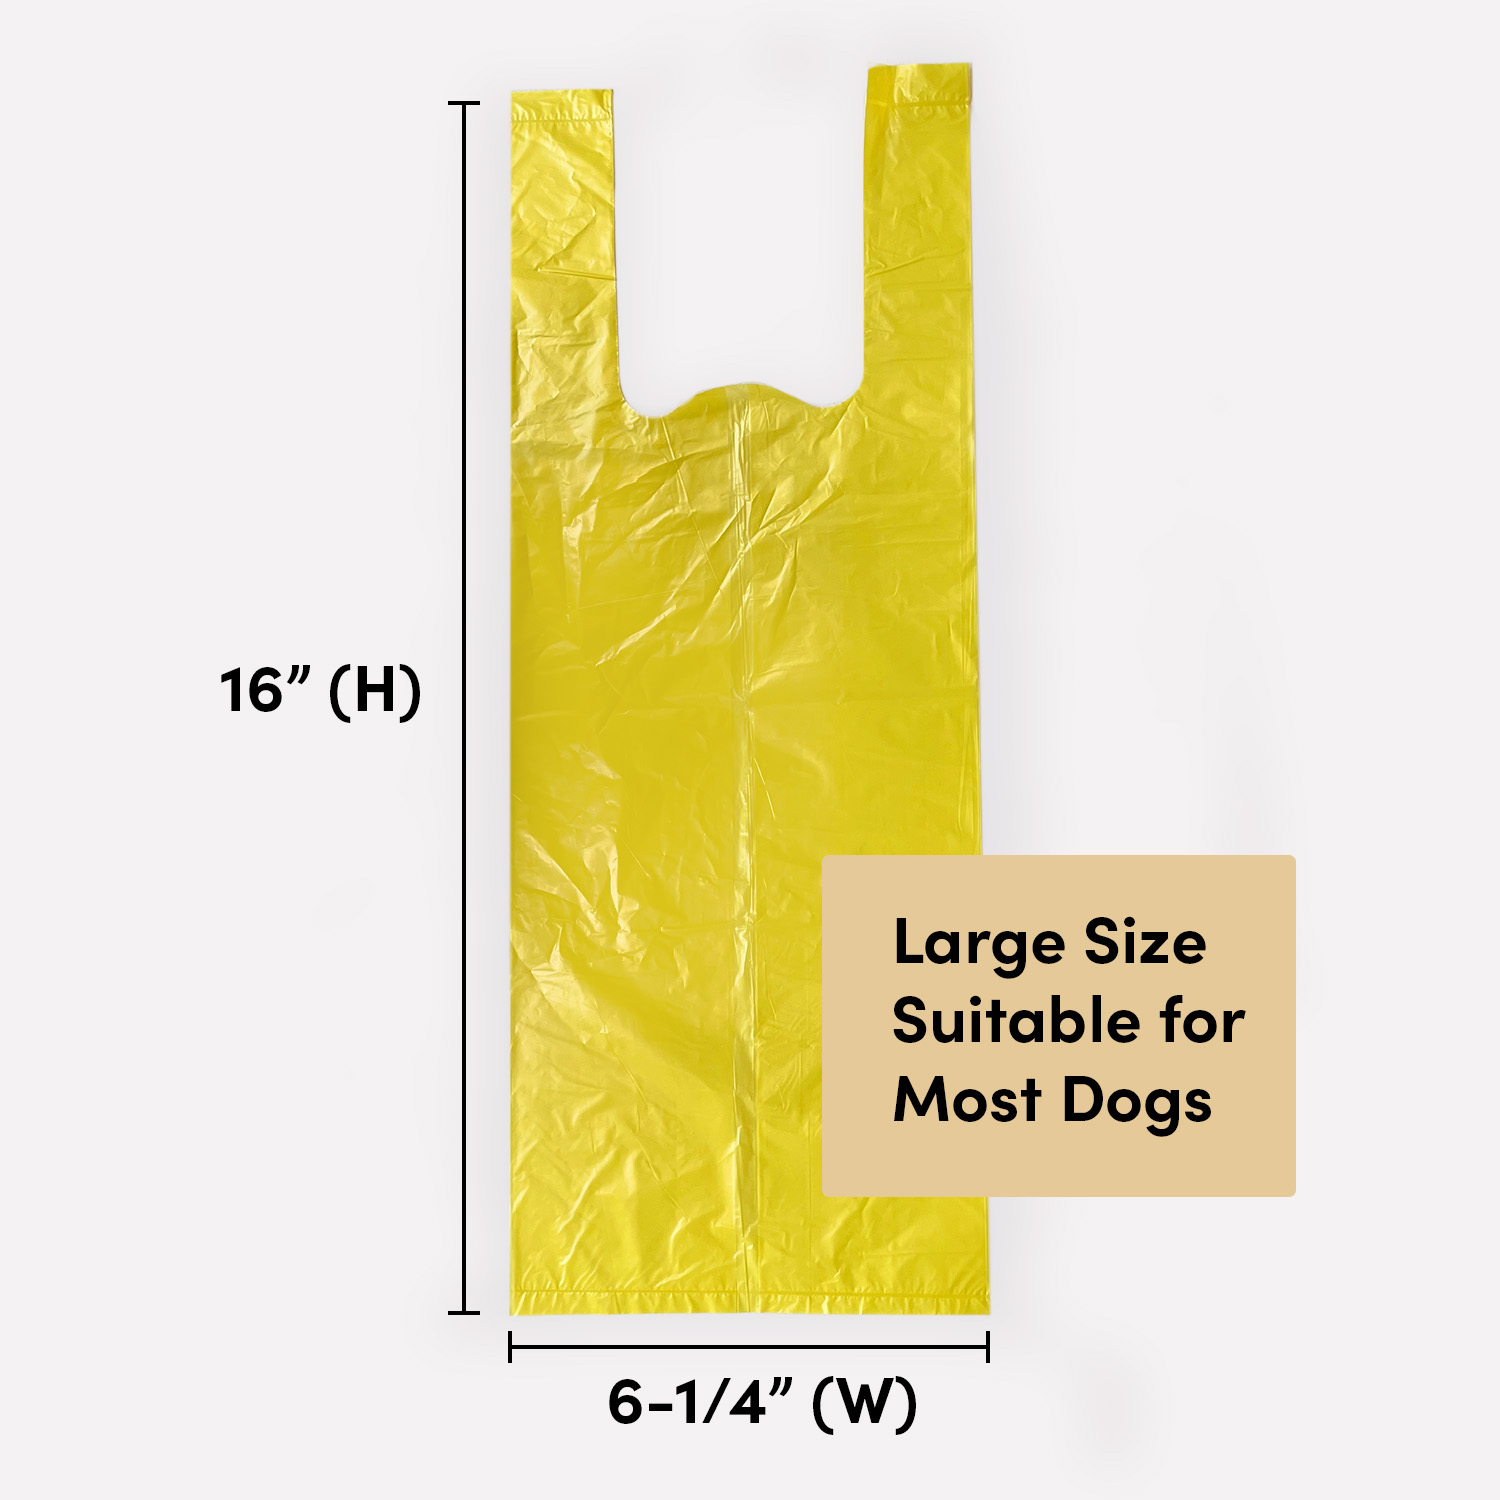 large size suitable for most dogs